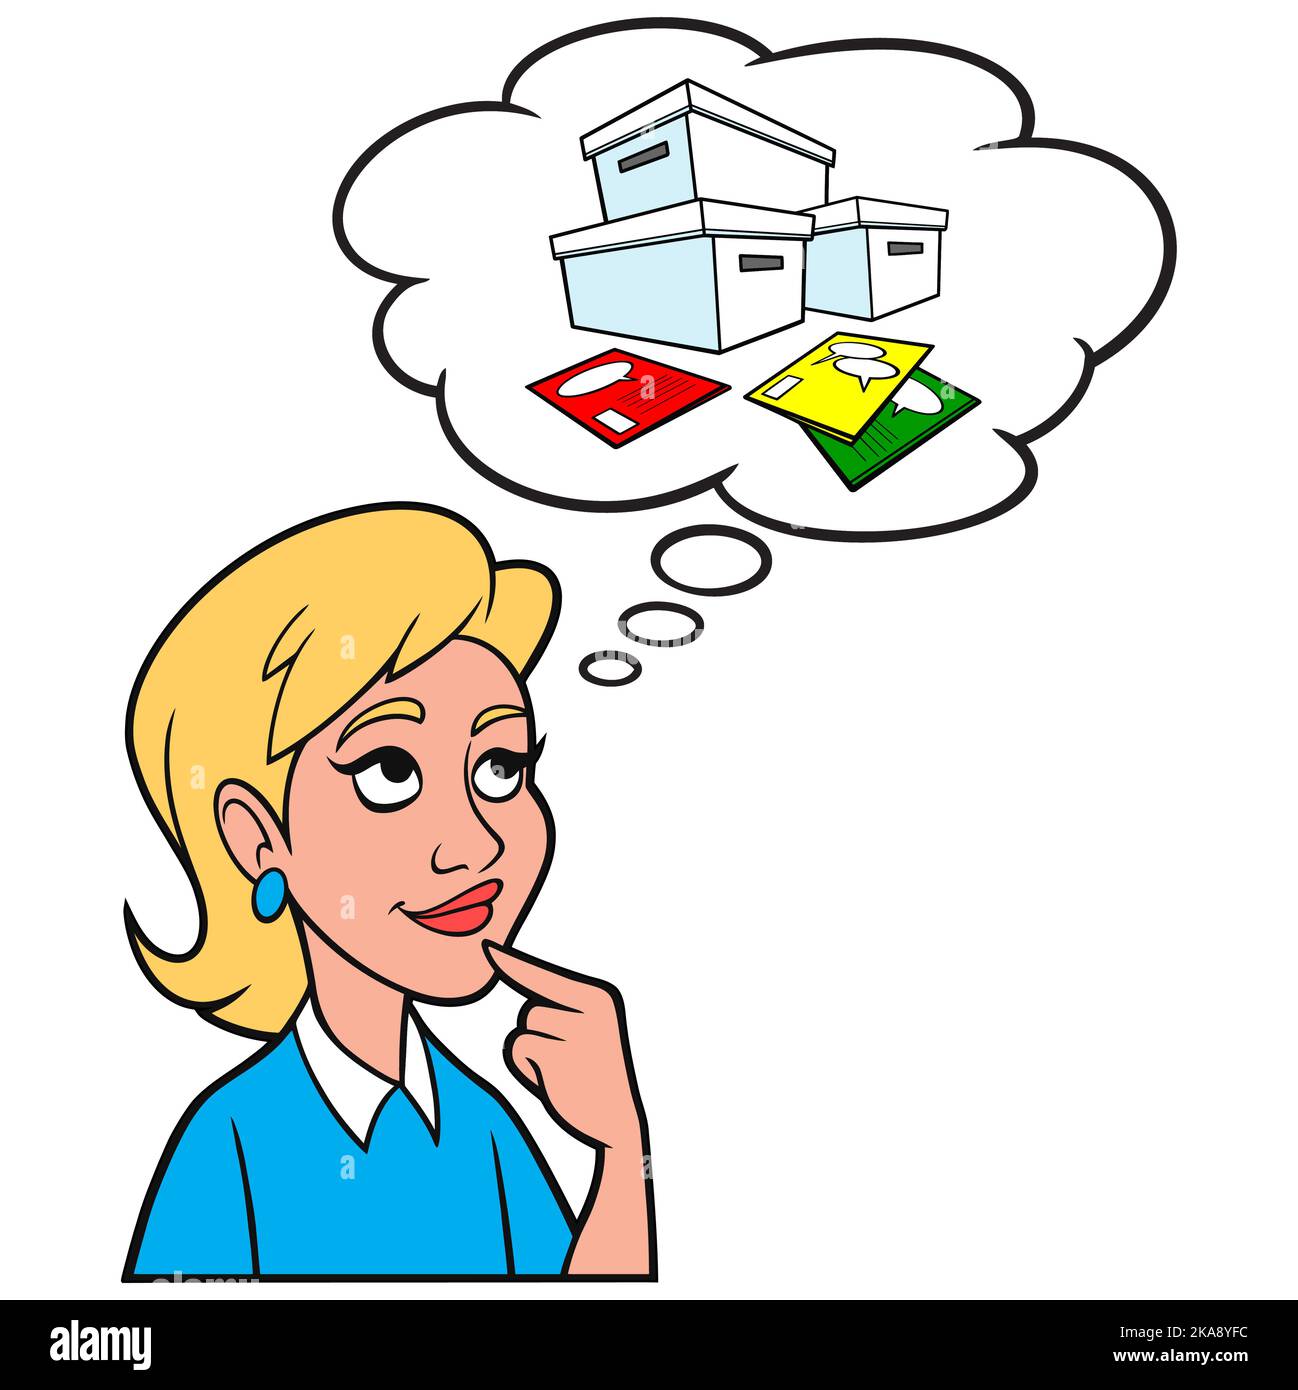 Girl thinking about collecting Comic Books - A cartoon illustration of a Girl thinking about collecting Comic Books. Stock Vector